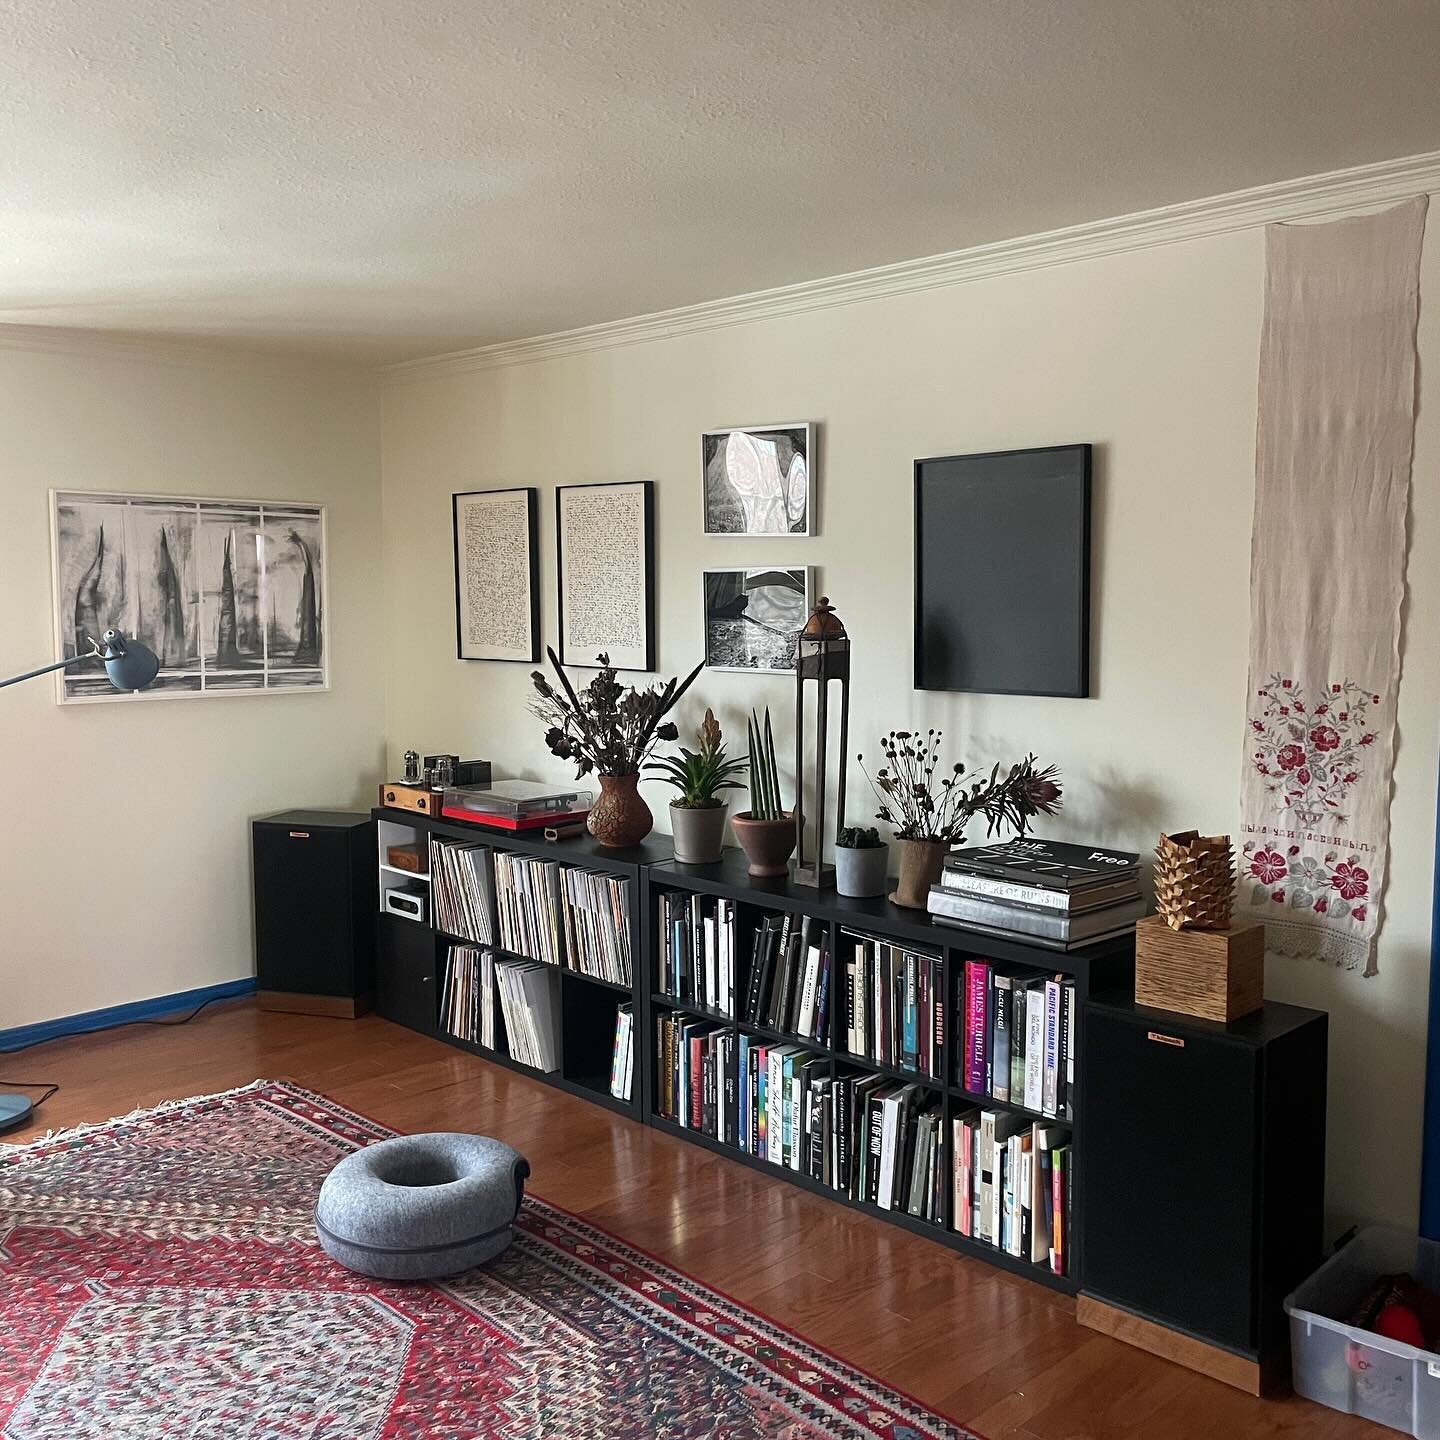 Finally we have enough wall space to hang some of the art we&rsquo;ve accumulated over years. Somewhere there pieces by @liza_sylvestre, @shanai_matteson, @kat_oi @maguyuko, @leonidzeiger, @max_photo_shot, @yaelharnik, Sasha Okun, and my own